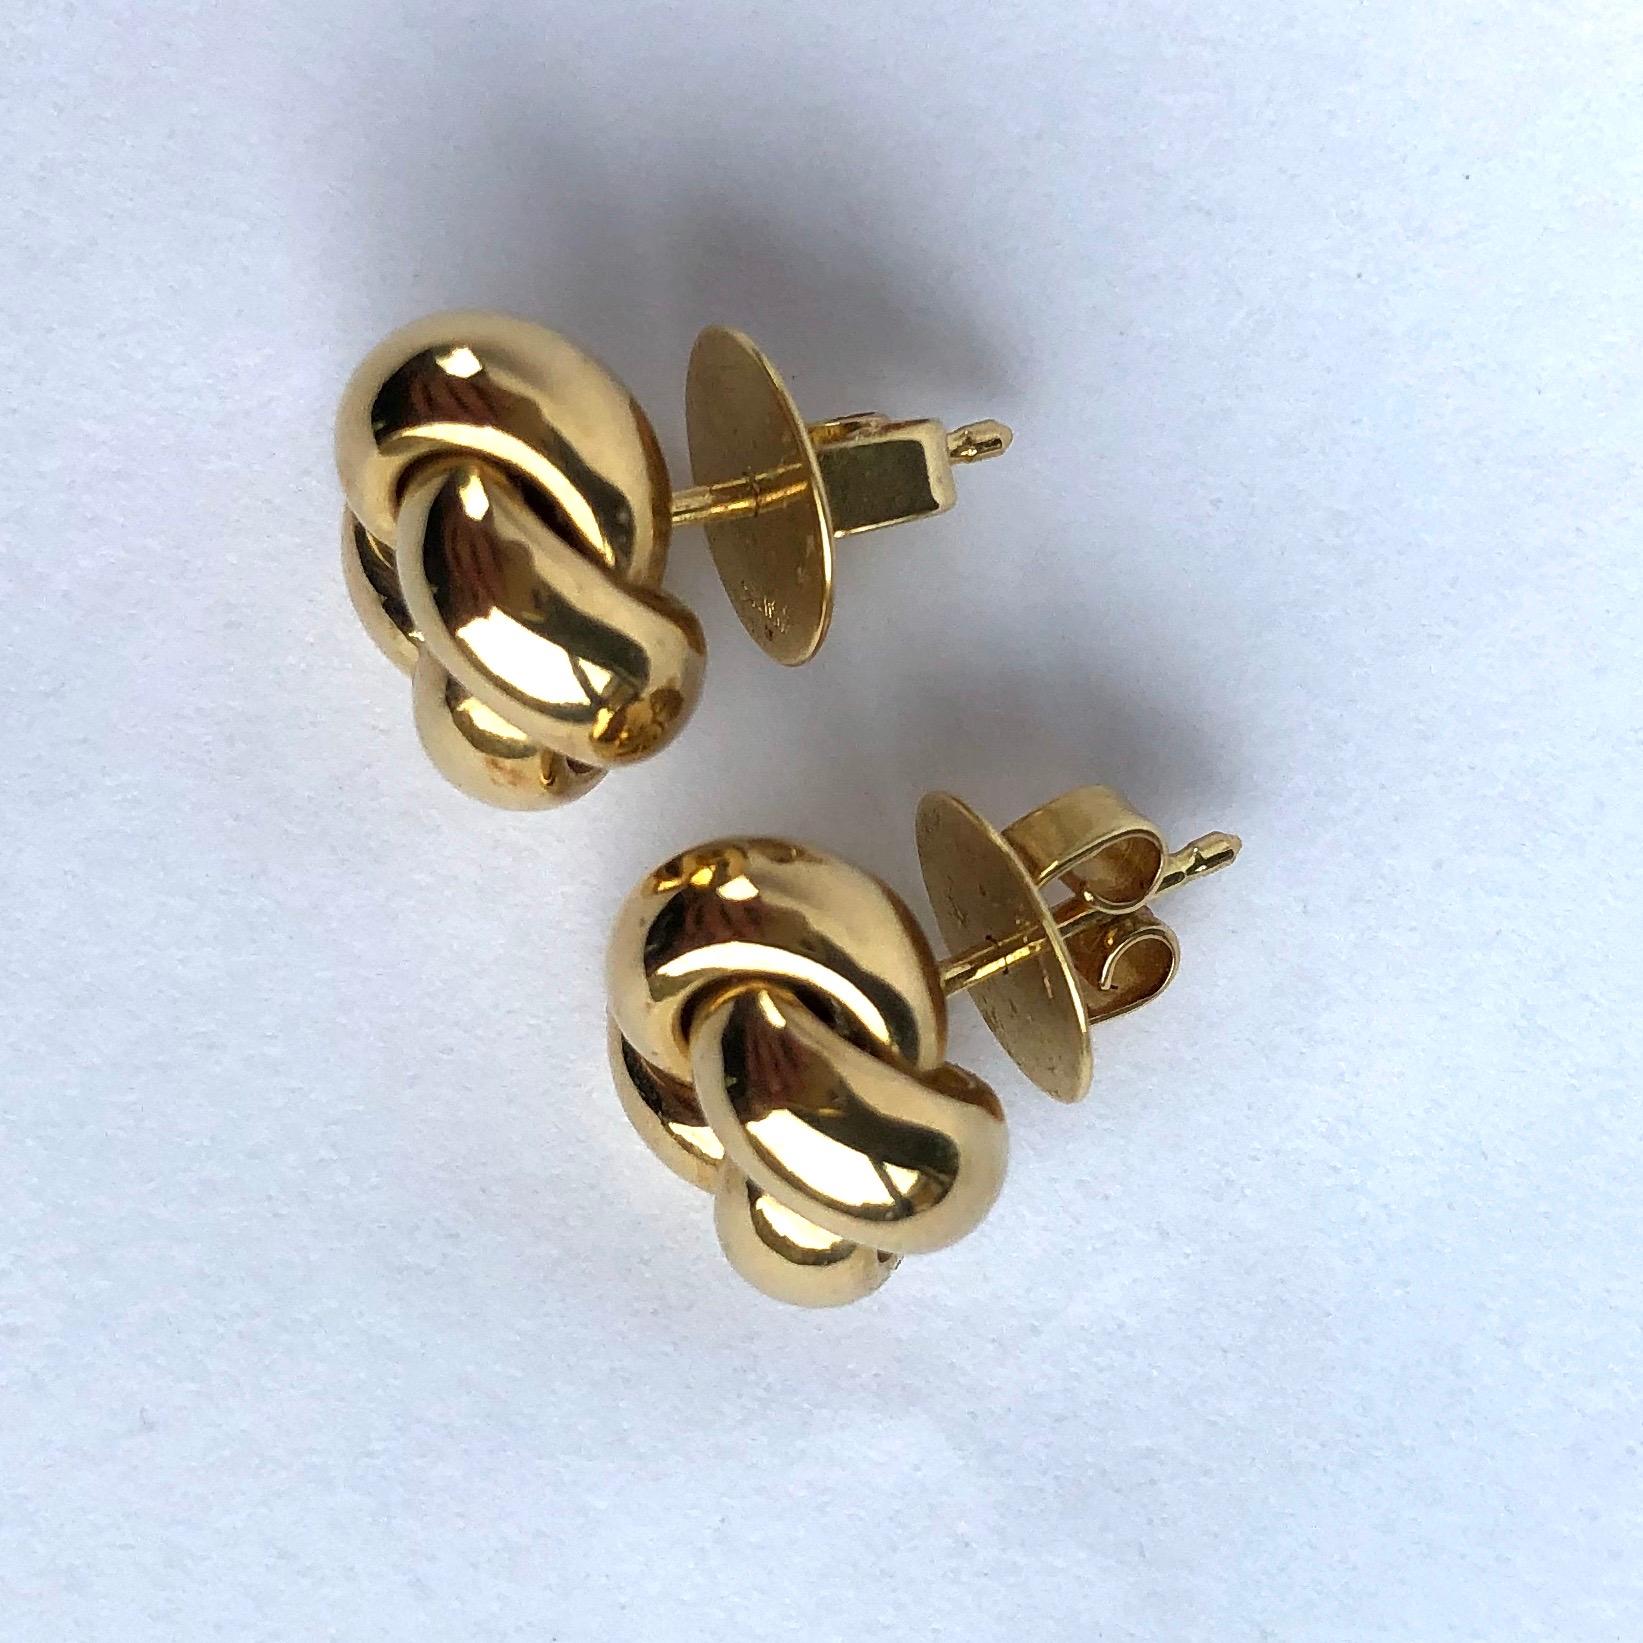 Glossy 18ct yellow gold superbly tied in a knot make the most stylish design for these earrings.

Knot Diameter: 12mm
Height From Ear: 6mm

Weight: 5.7g